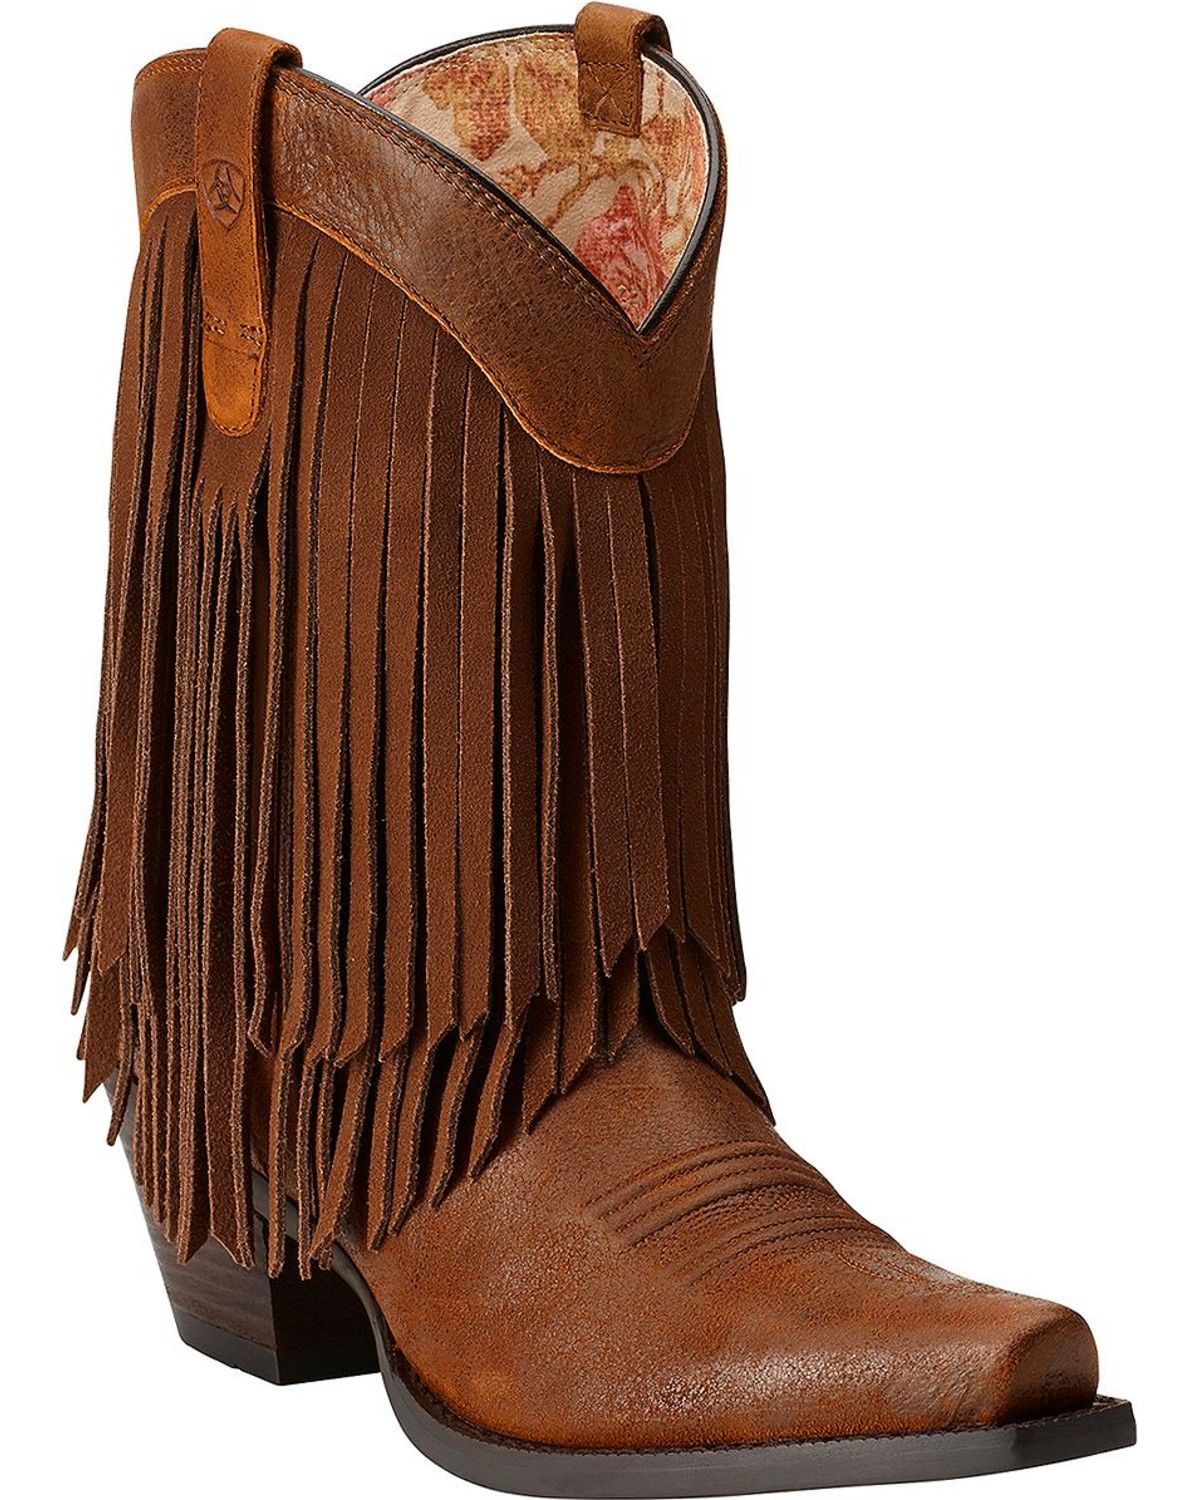 Ariat Gold Rush Fringe Cowgirl Boots - Snip Toe, Brown, hi-res